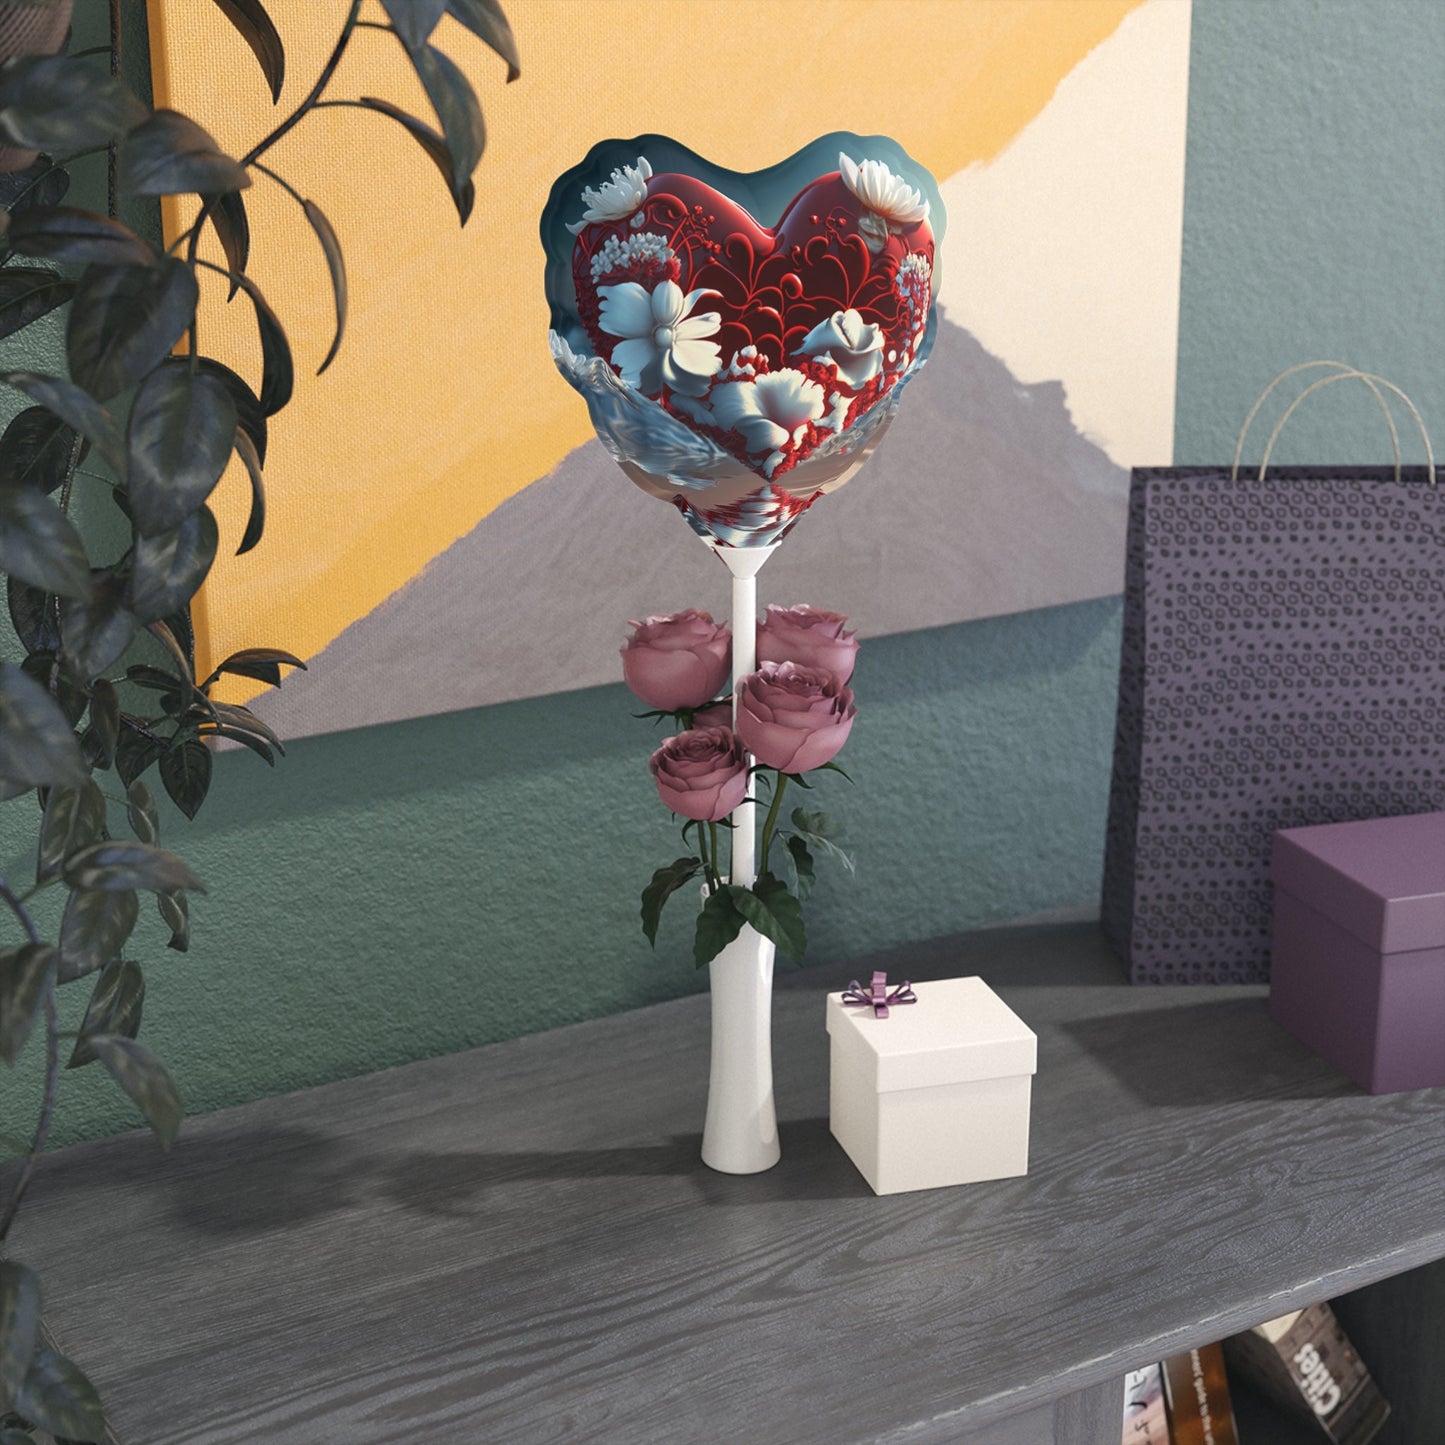 Home Decor - Happy Valentine's Day Balloons (Round And Heart-shaped), 6"